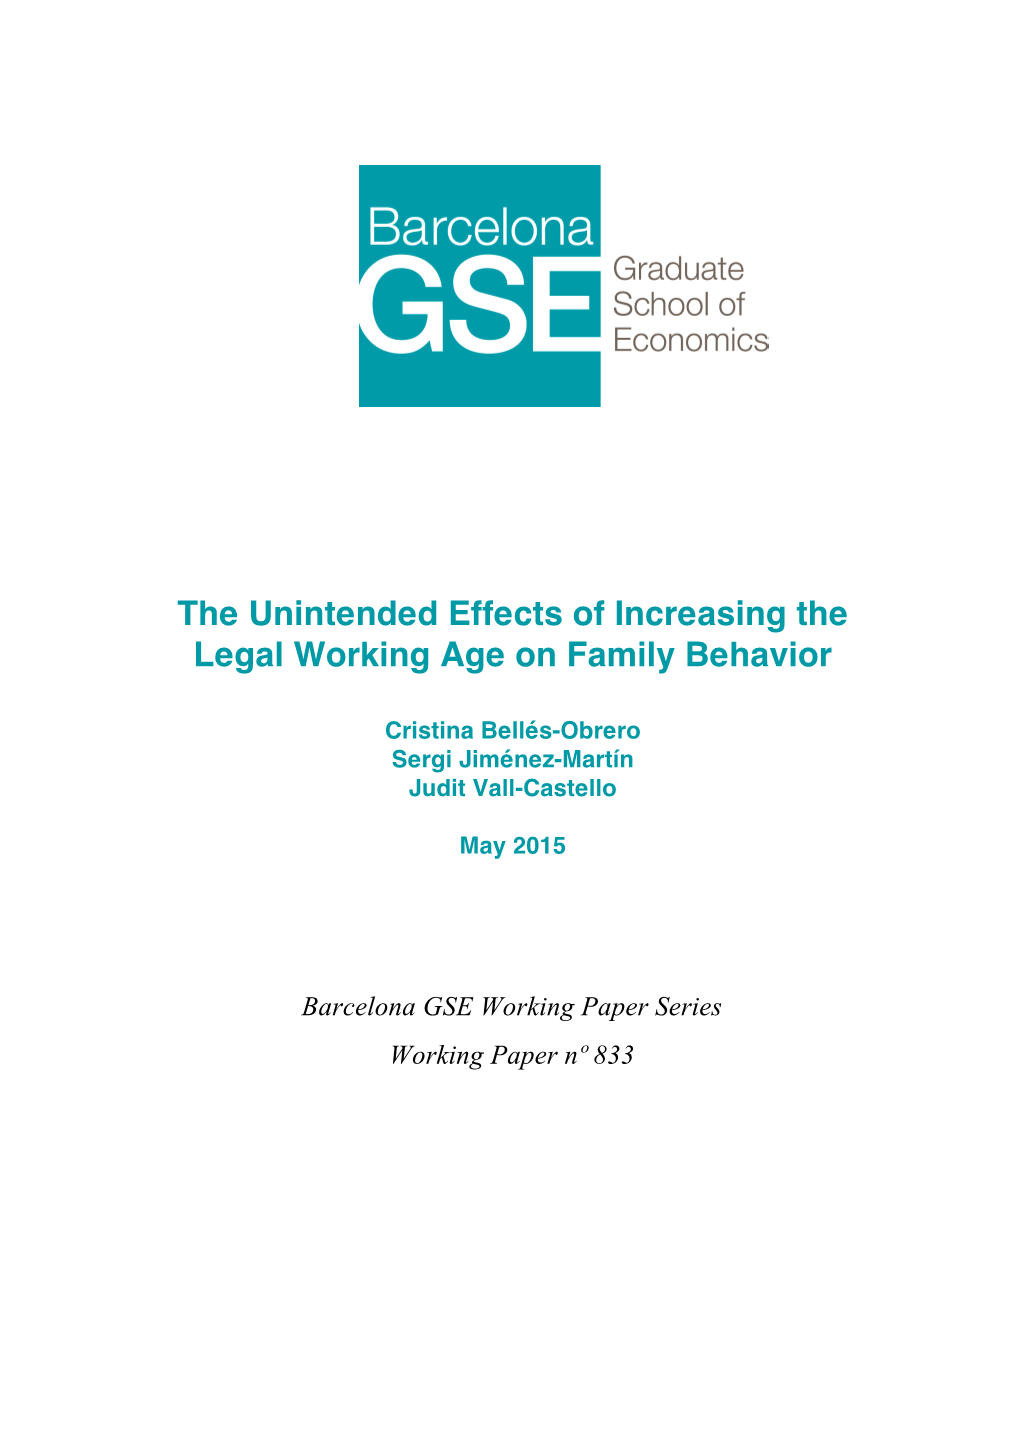 The Unintended Effects of Increasing the Legal Working Age on Family Behavior